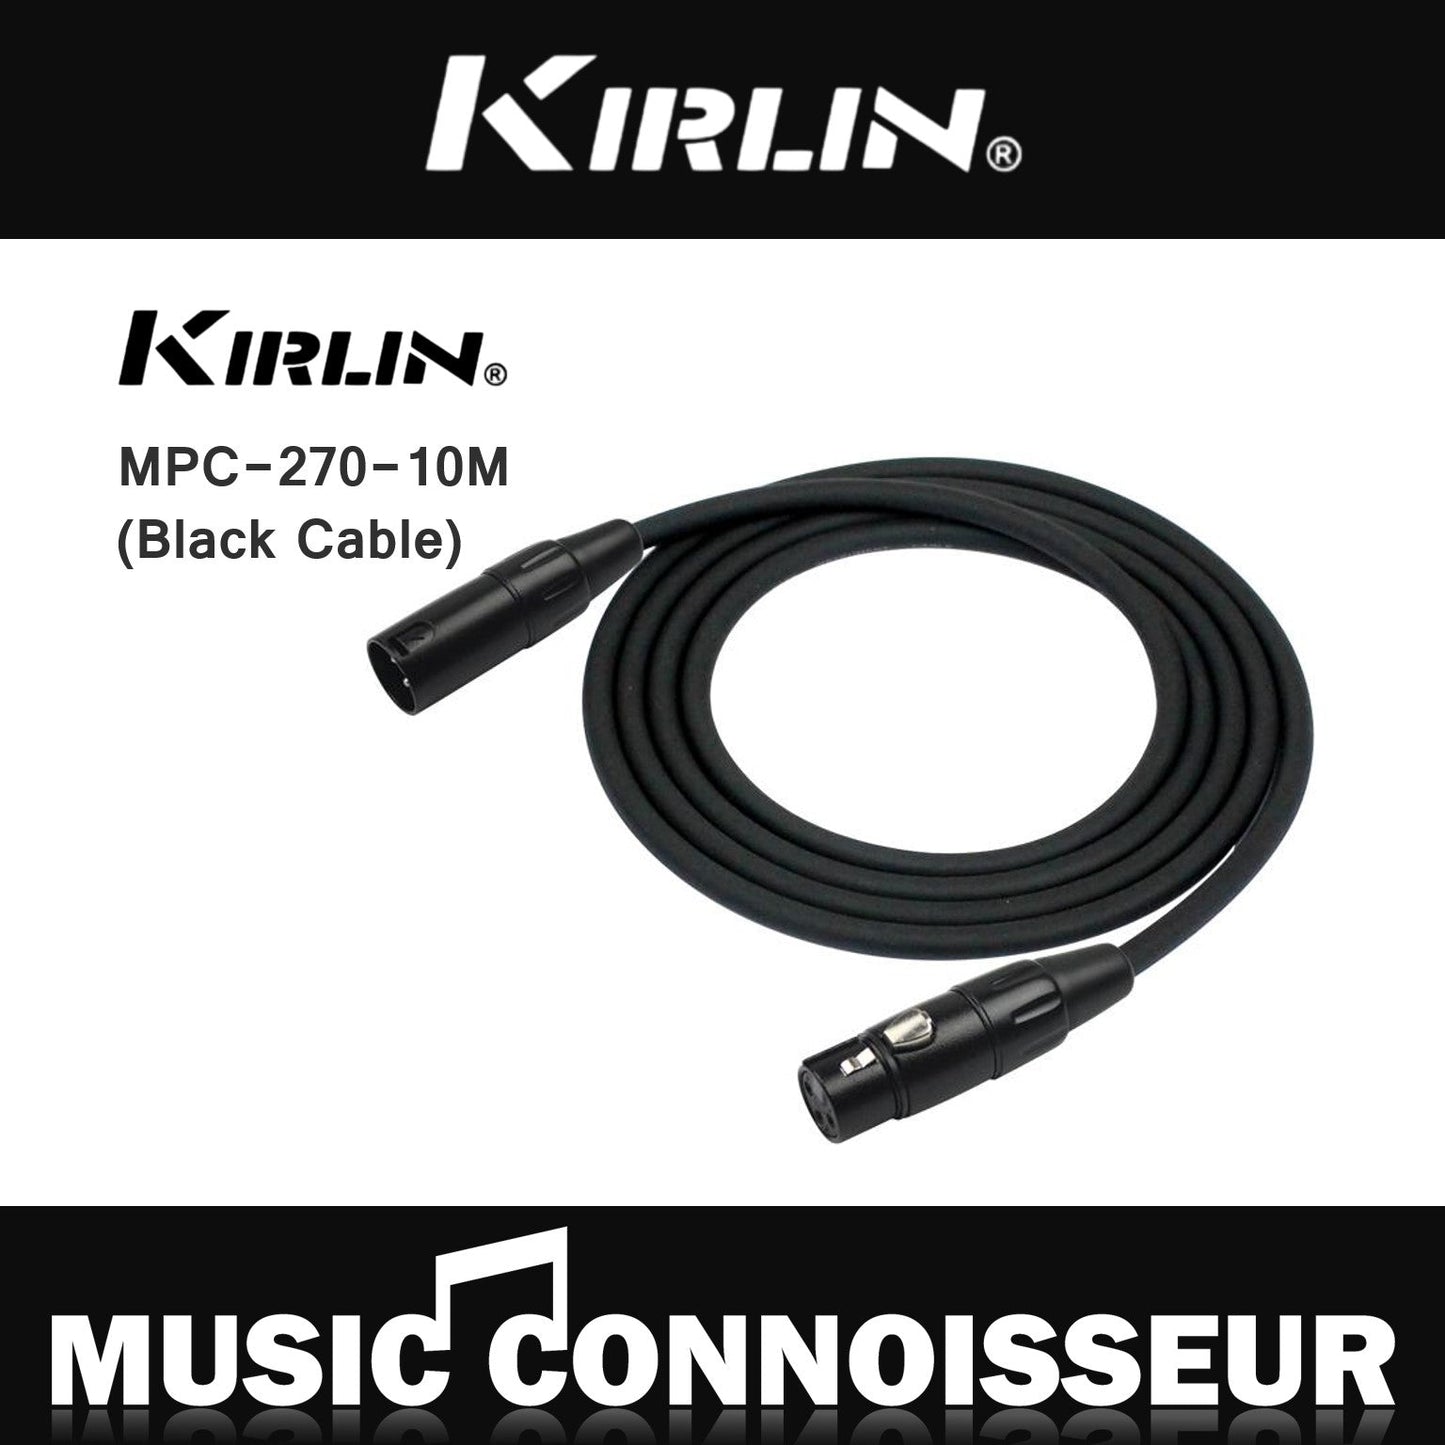 Kirlin MPC-270-10M Cable (Black Cable)